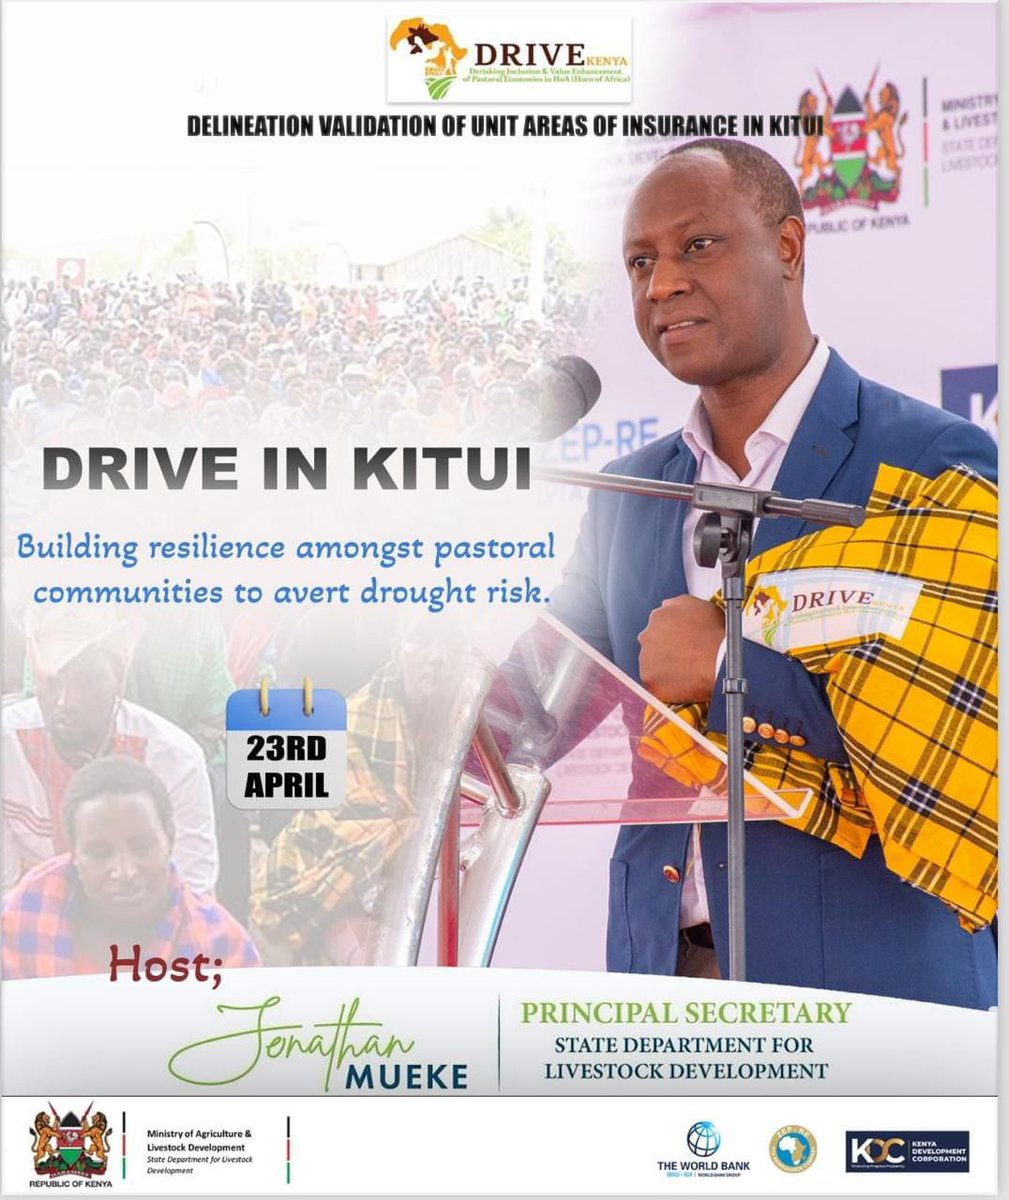 The DRIVE project, with a budget of Ksh 16.08 billion, aims to benefit 125,000 pastoral households over a five-year period in 21 ASAL counties of Kenya where pastoralism is predominant and drought insurance products are viable.
#DRIVEinKitui 
Livestock Insurance
@jmueke